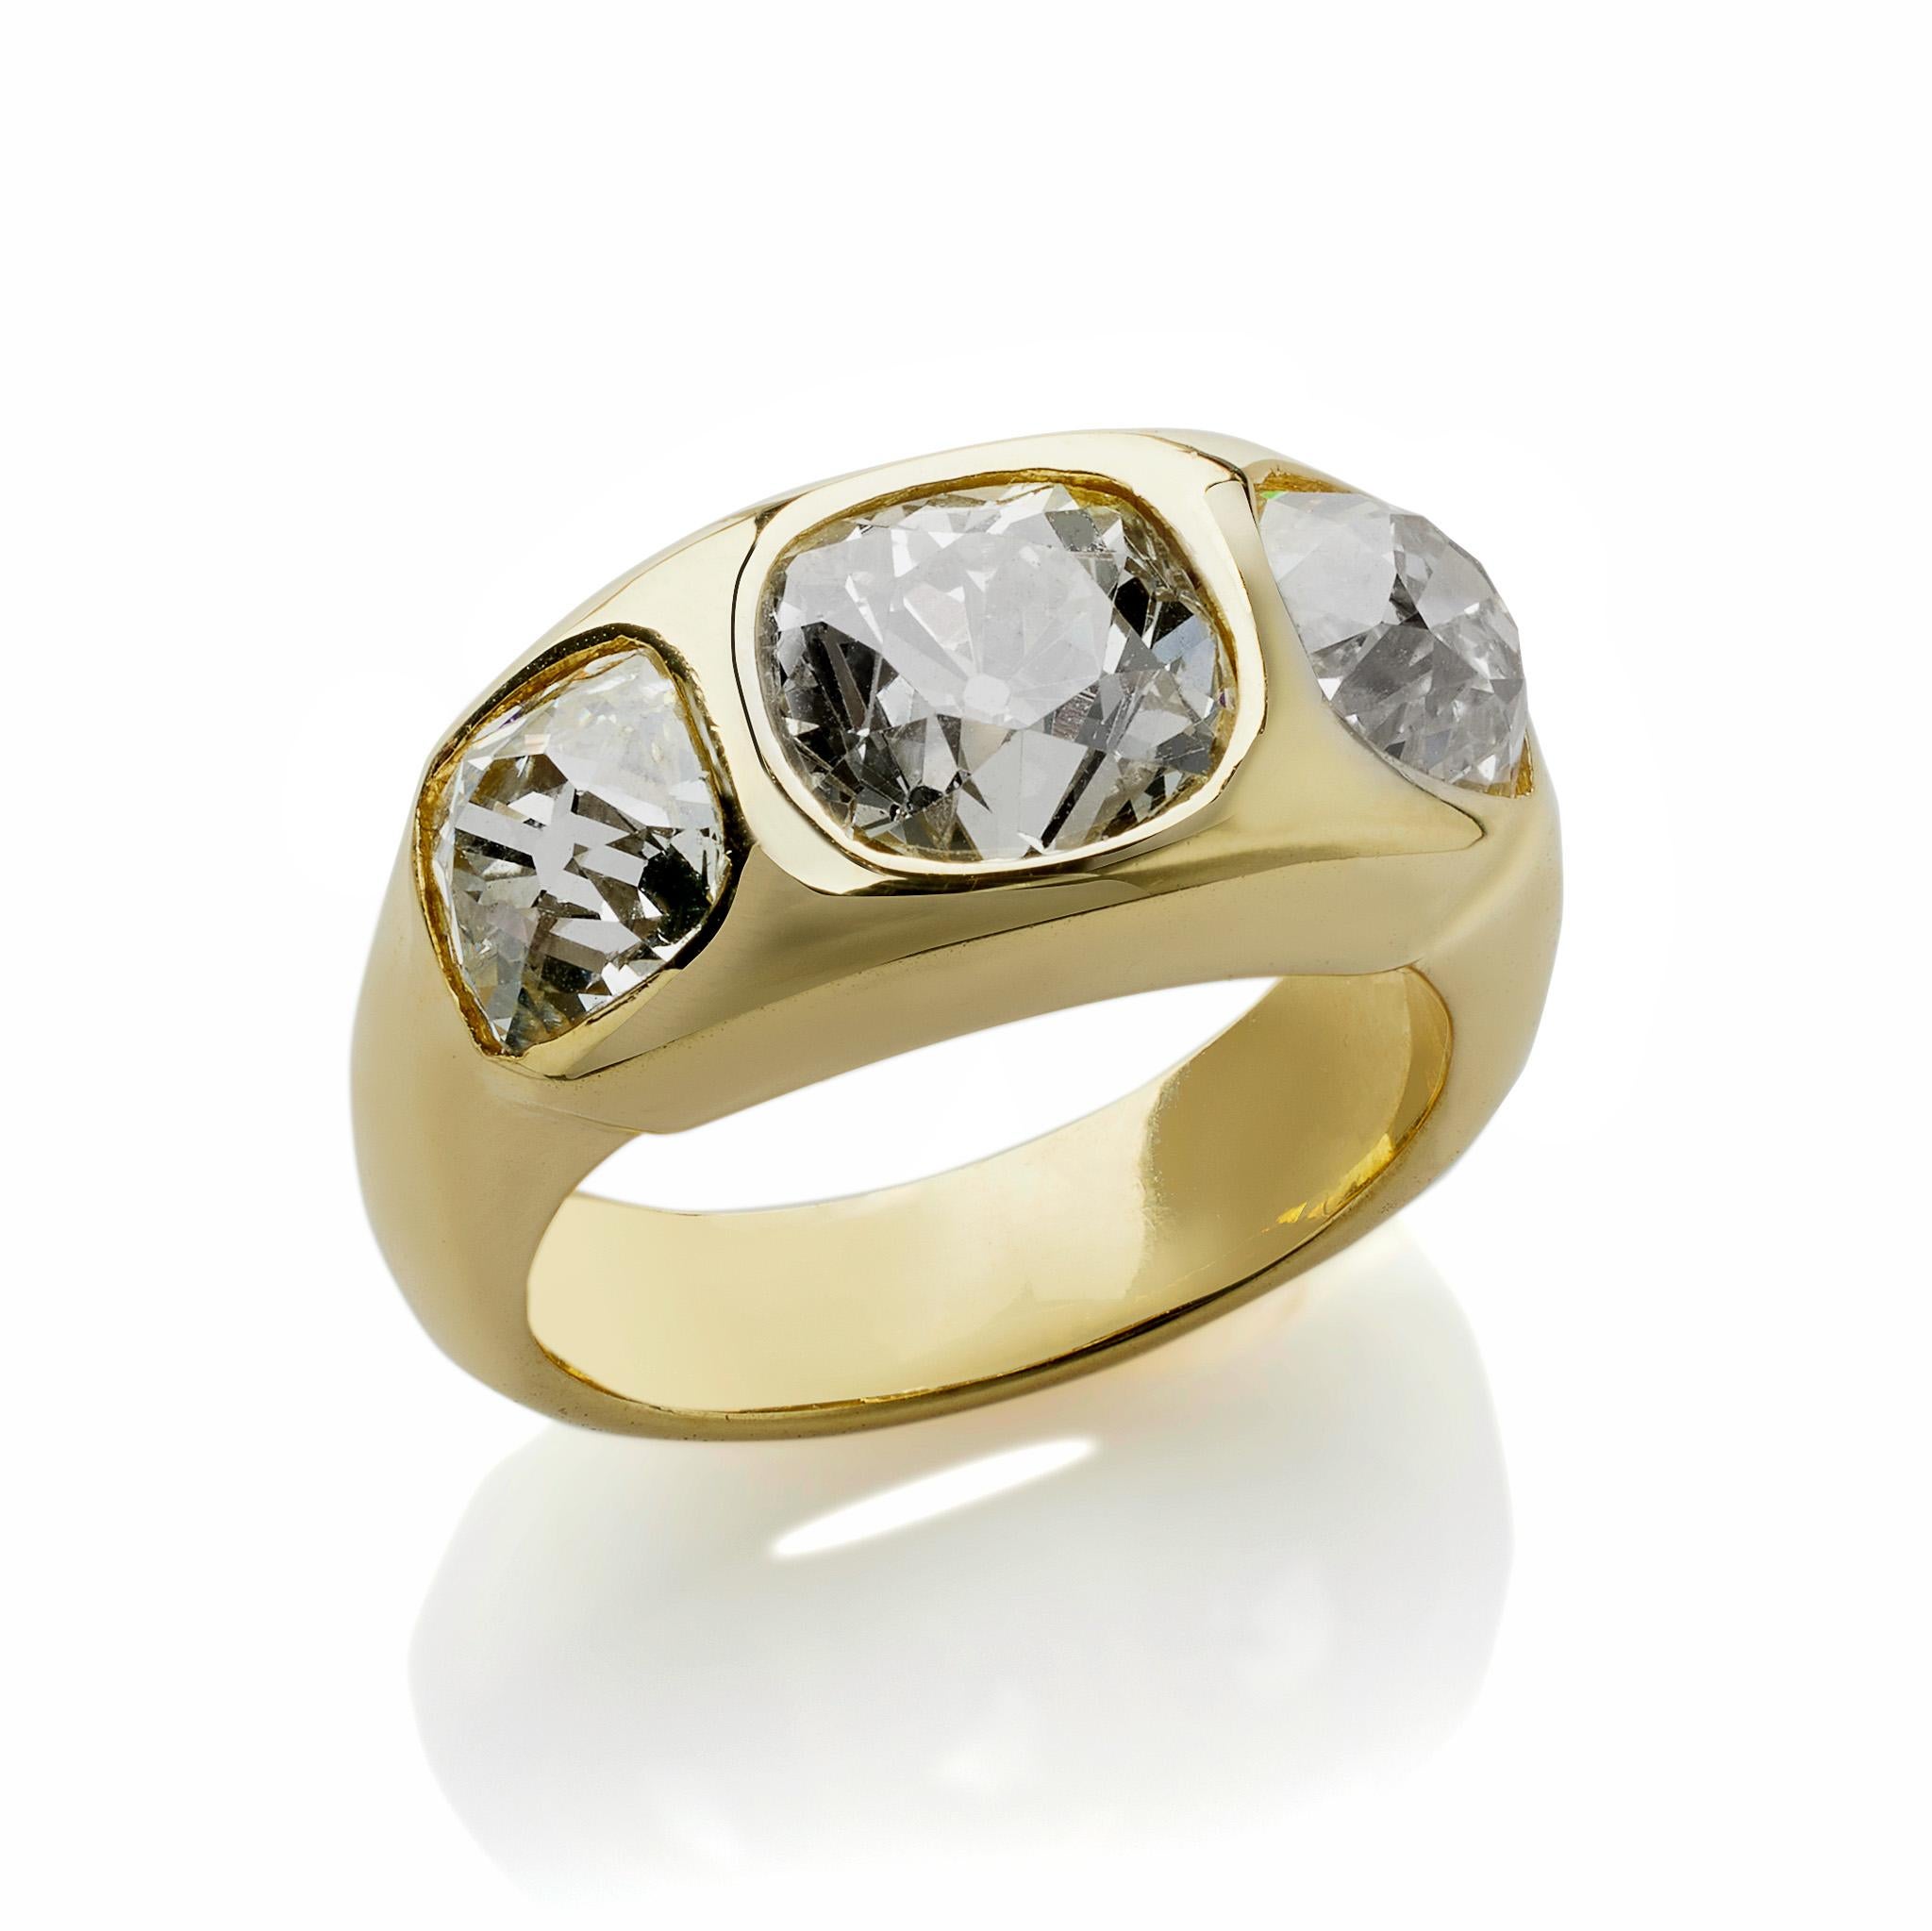 This antique 18K gold, three stone old mine-cut diamond ring dates from circa 1900, and features a central diamond weighing approximately 2.00 carats, flanked by diamonds weighing approximately 1.00 carat each. The central diamond is a